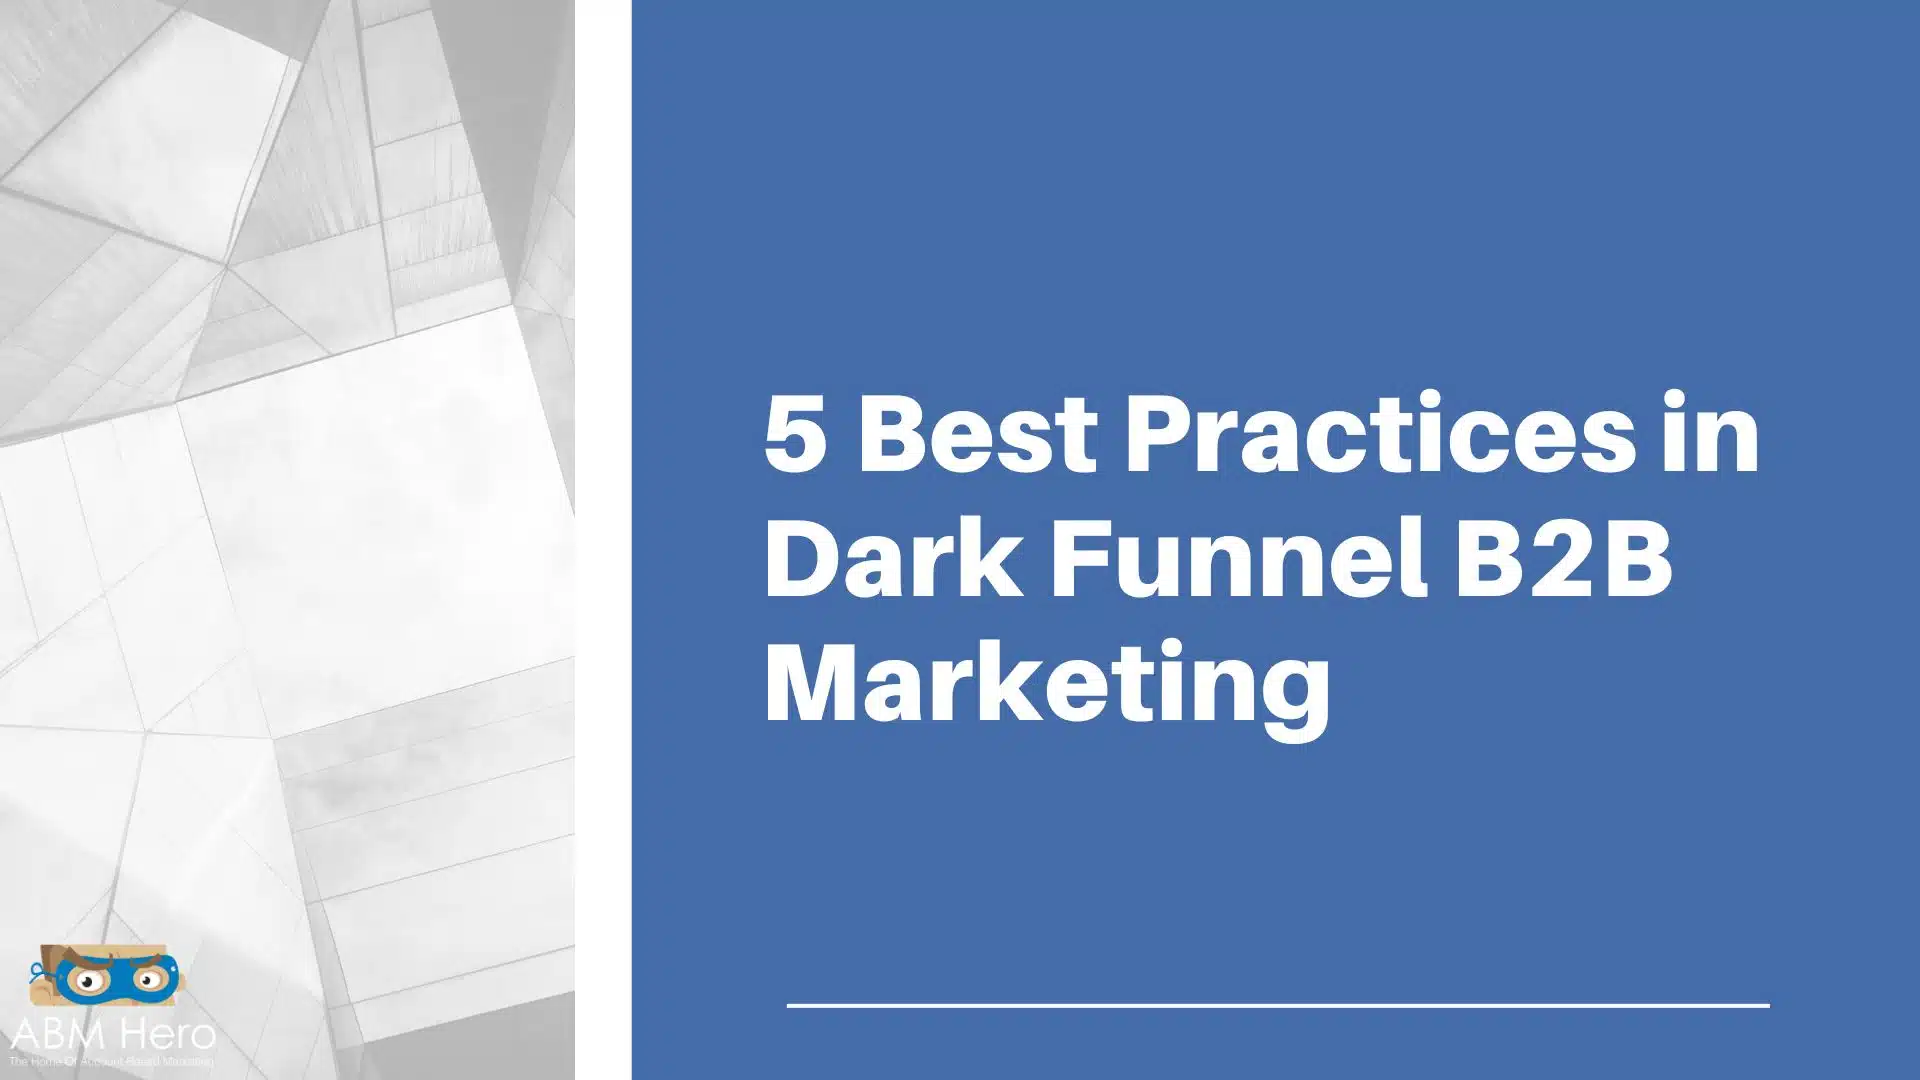 You are currently viewing 5 Best Practices in Dark Funnel B2B Marketing